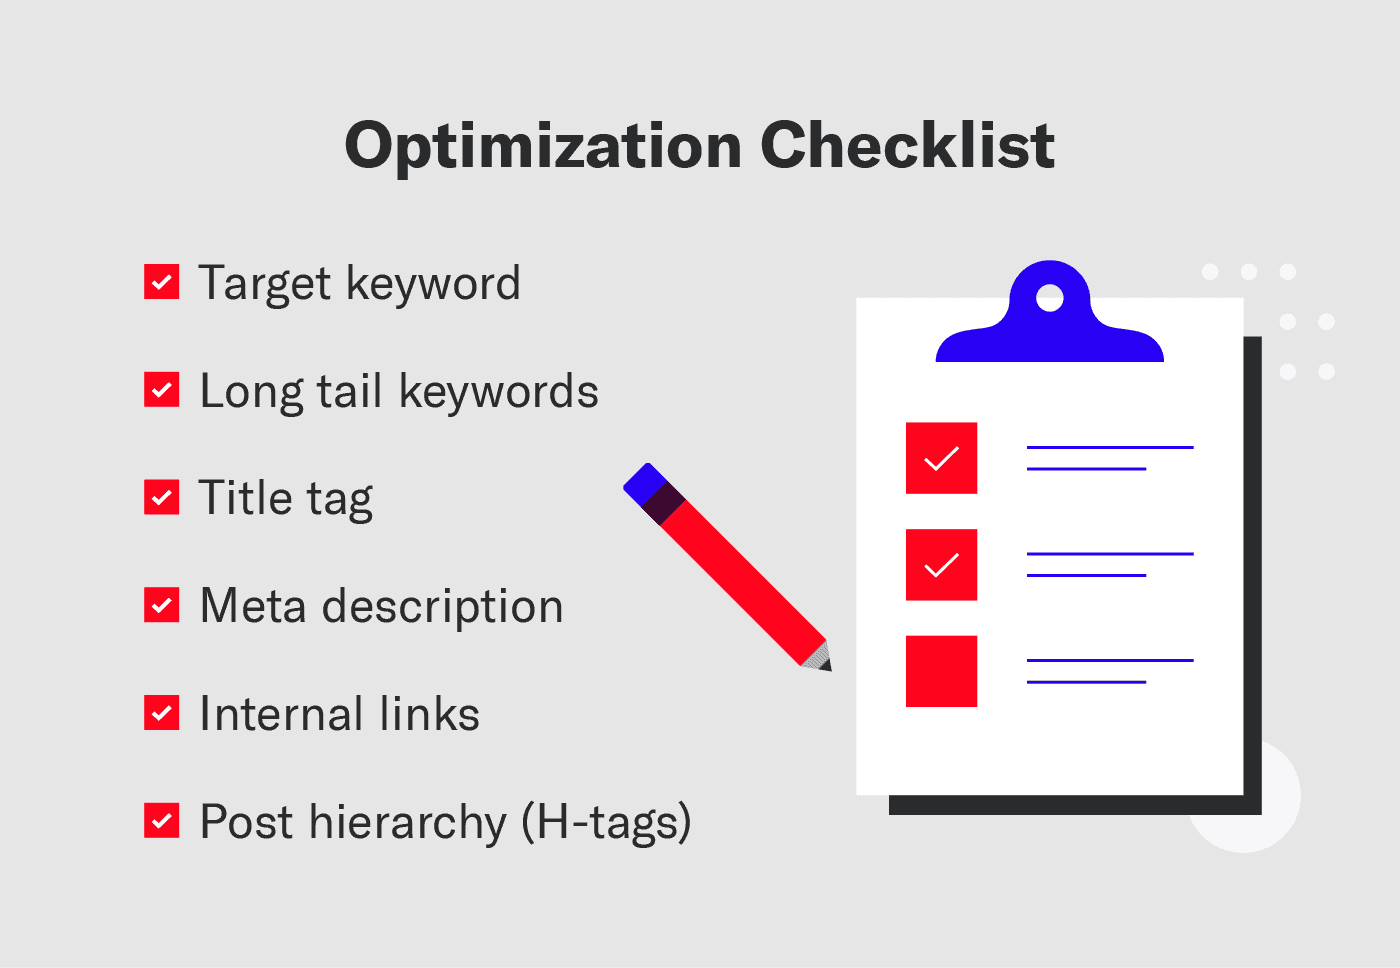 An image showing an optimization checklist to help with blog post outlines